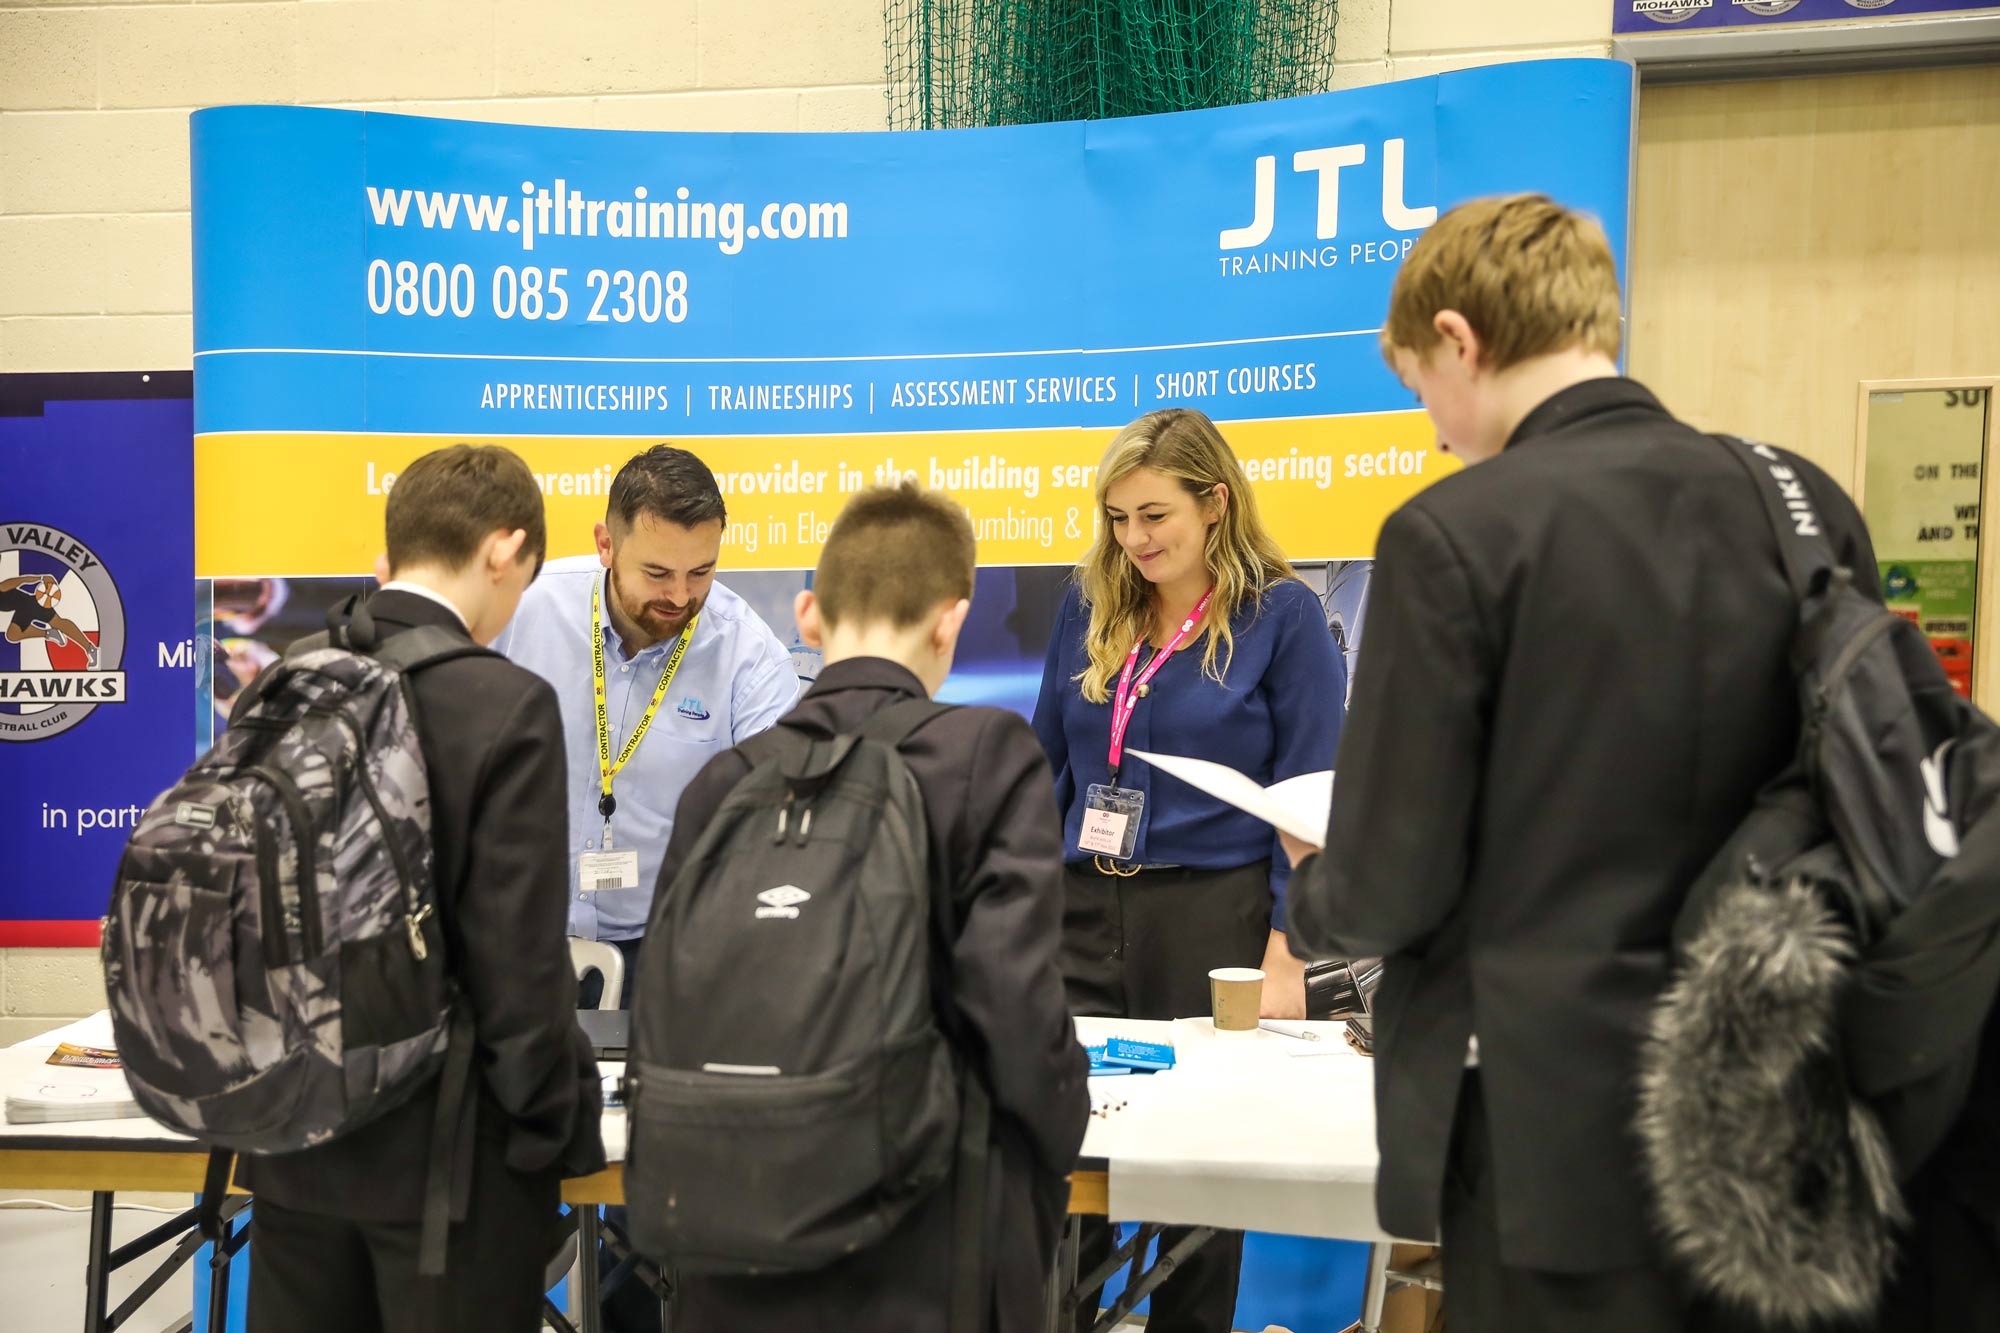 NAW Activity - JTL career event stand with learners